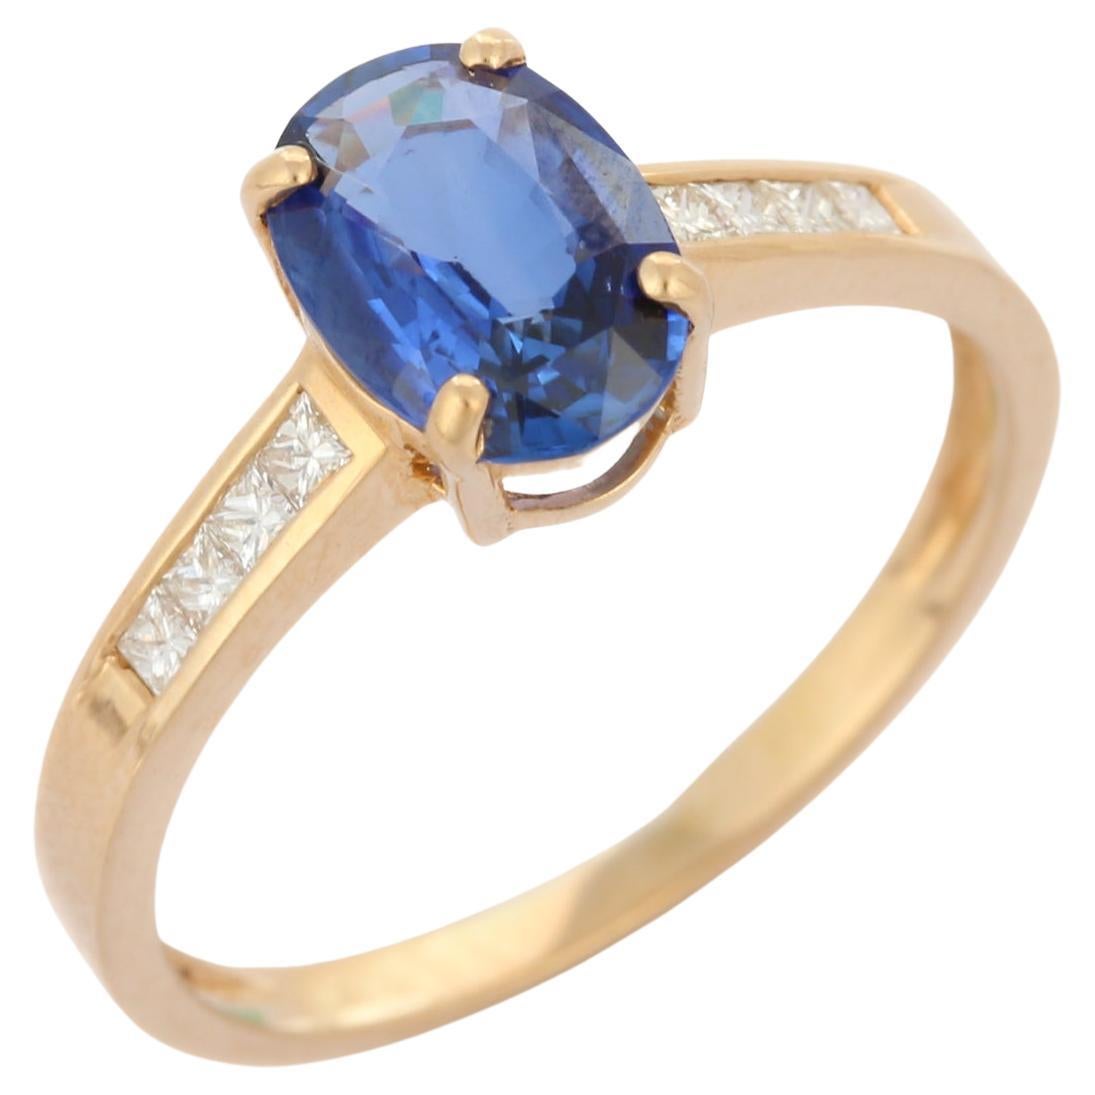 Solitaire Oval Blue Sapphire Diamond Engagement Ring in 14k Solid Yellow Gold